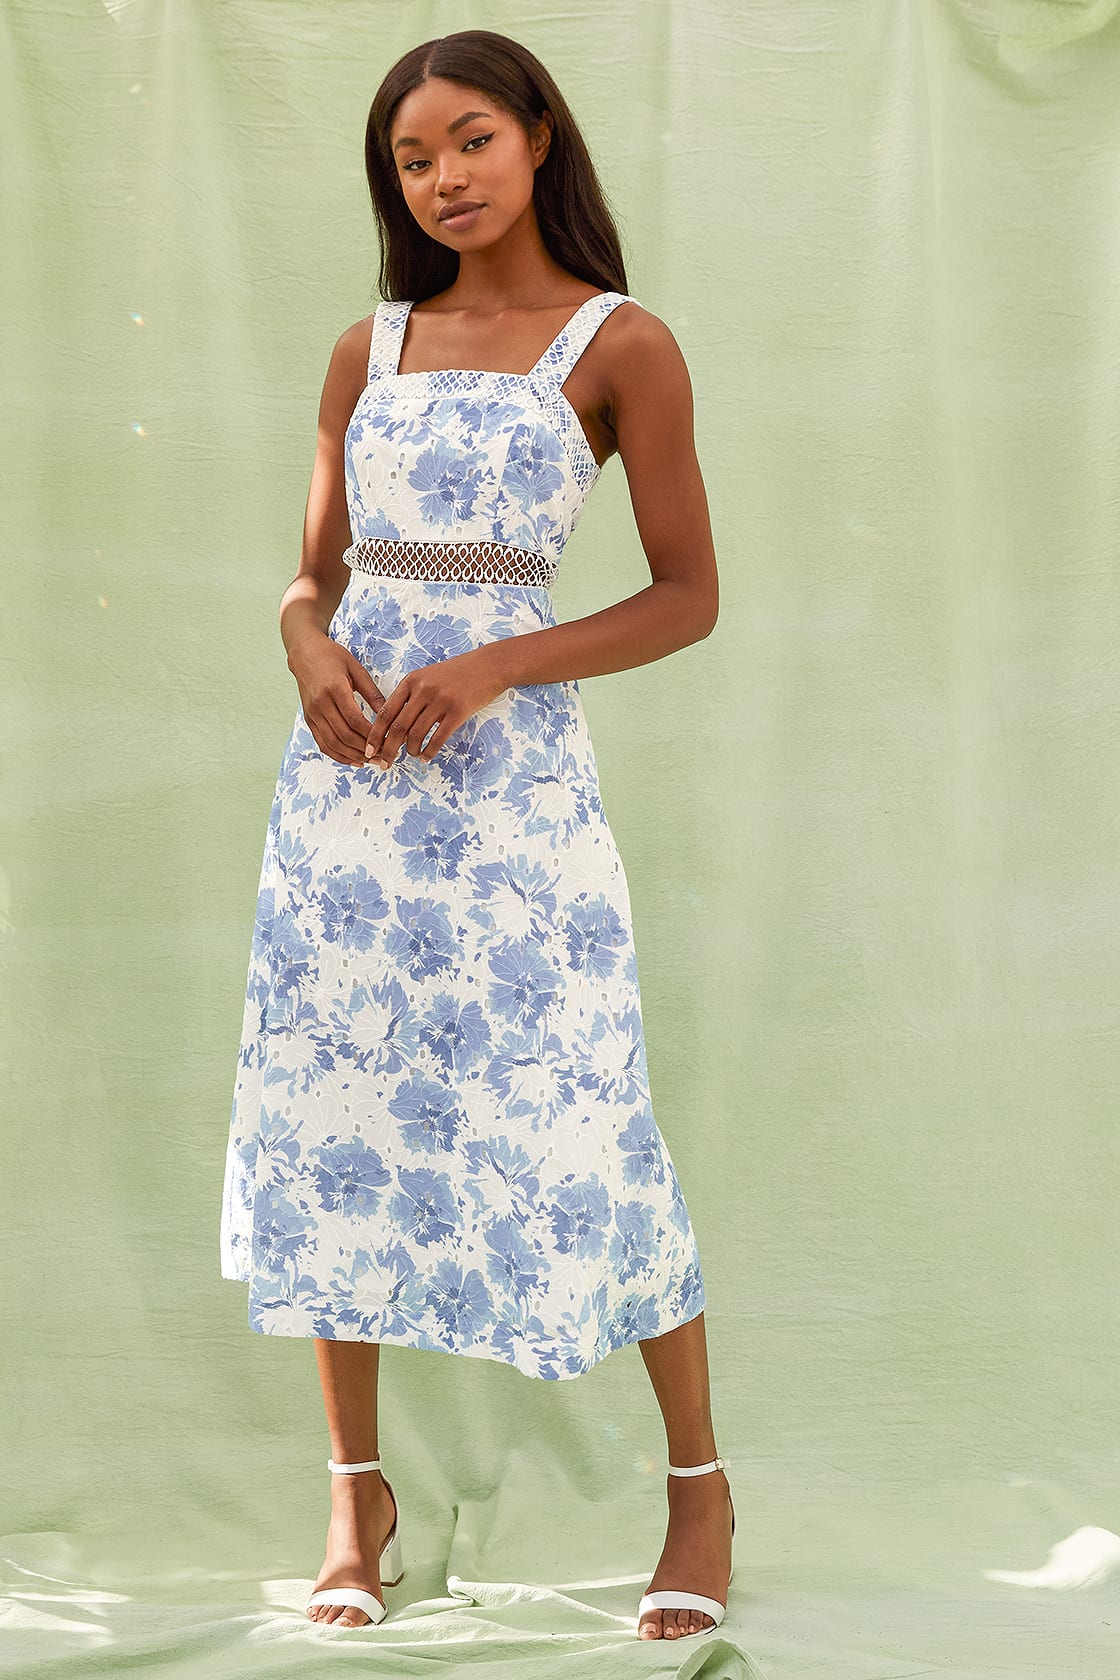 Blue and White Floral Midi Dress for Polo Match